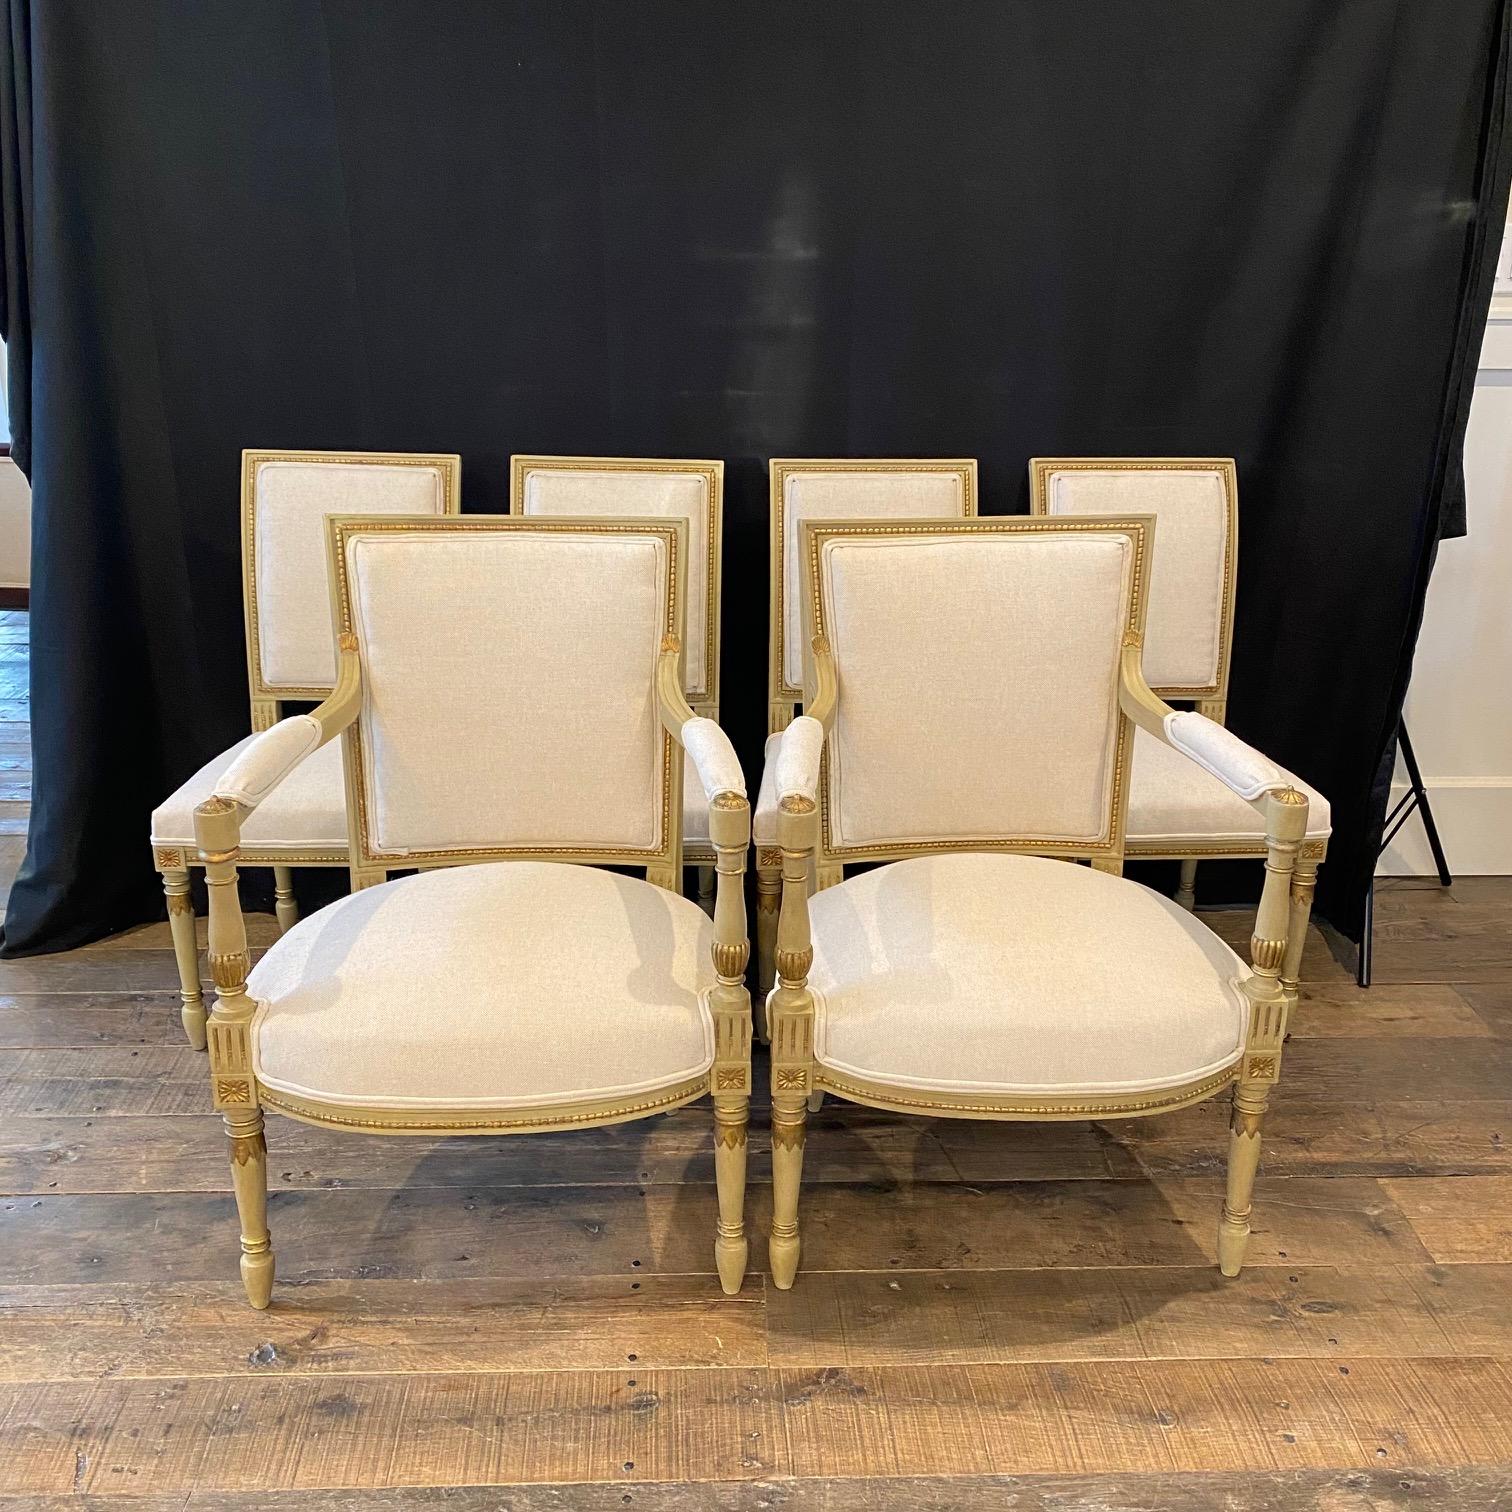 These French Louis XVI chairs have an elegant silhouette and a carved wooden frame newly upholstered in a high quality British cotton/linen neutral fabric. The chairs have a square backrest and seat carved with classicizing details. The gold gilt